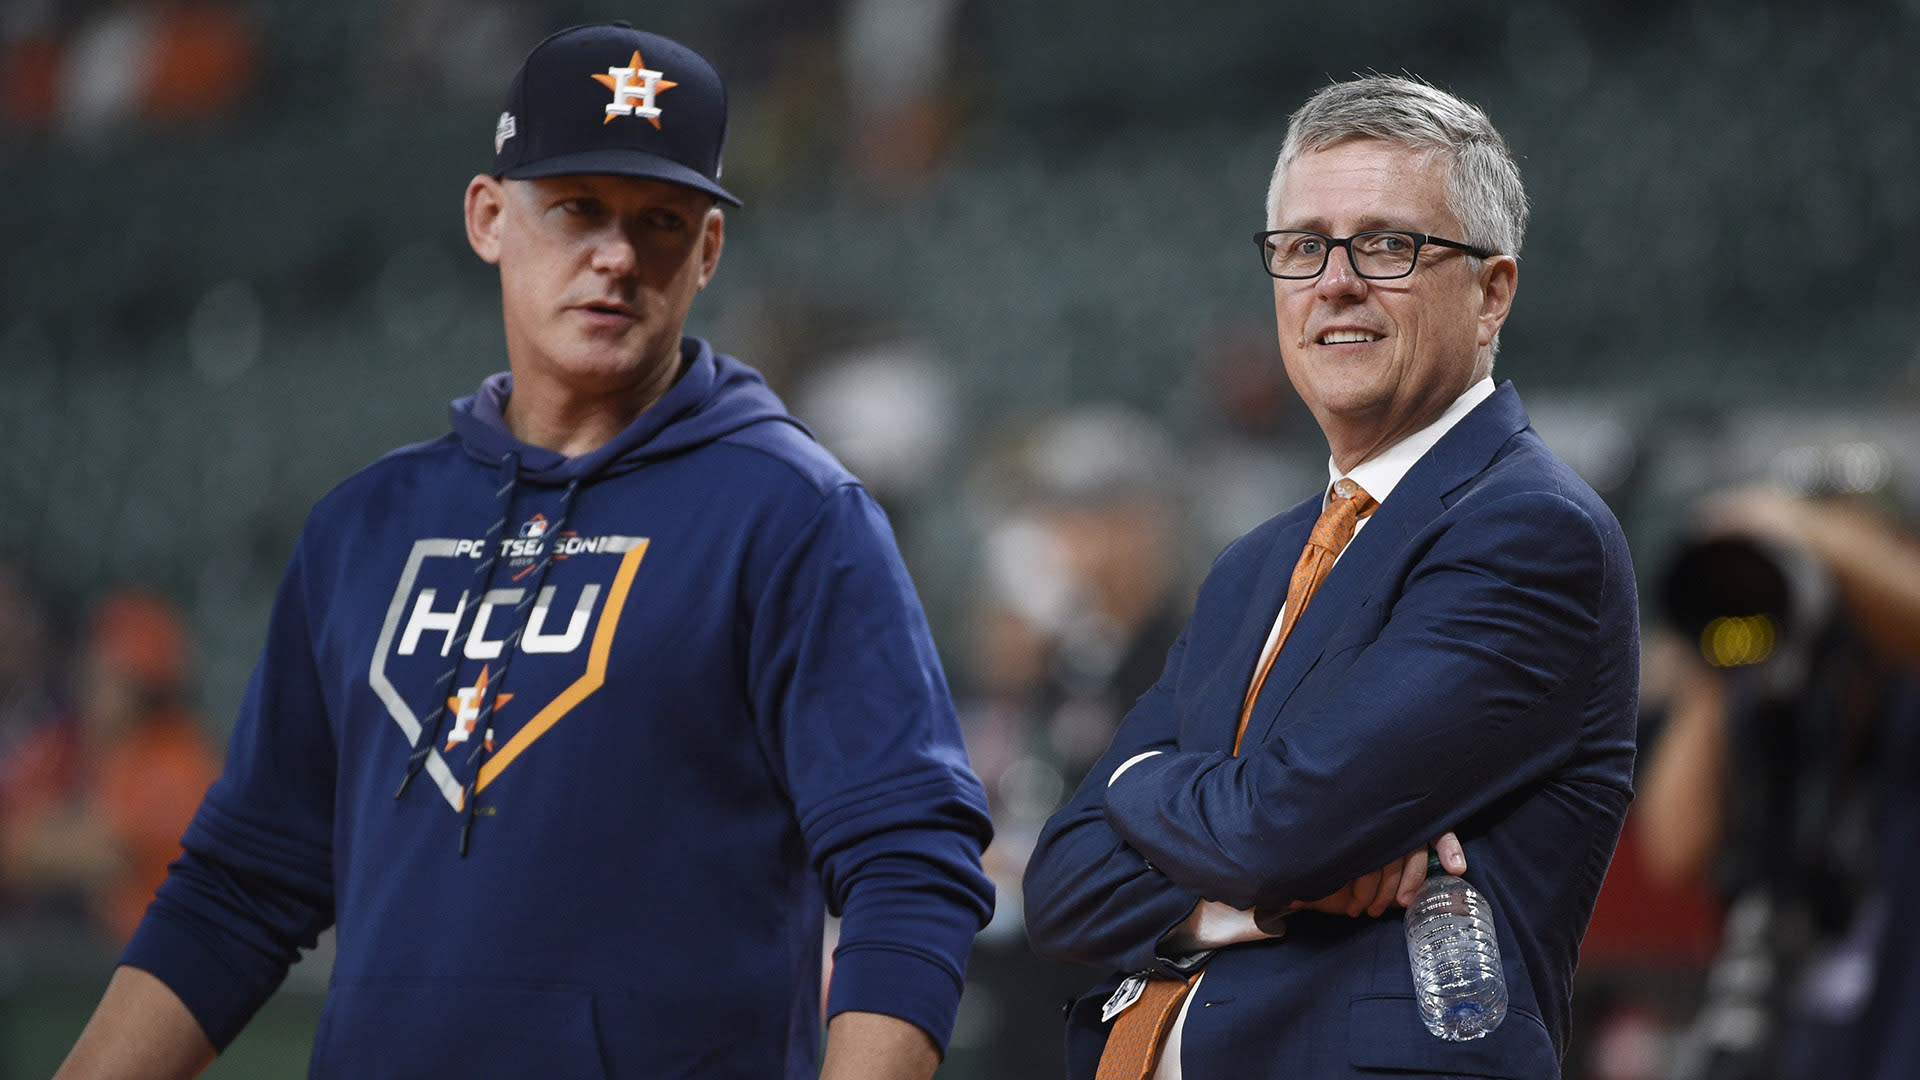 A fan checked every pitch in the Astros' sign-stealing scandal and says  their World Series title is tainted